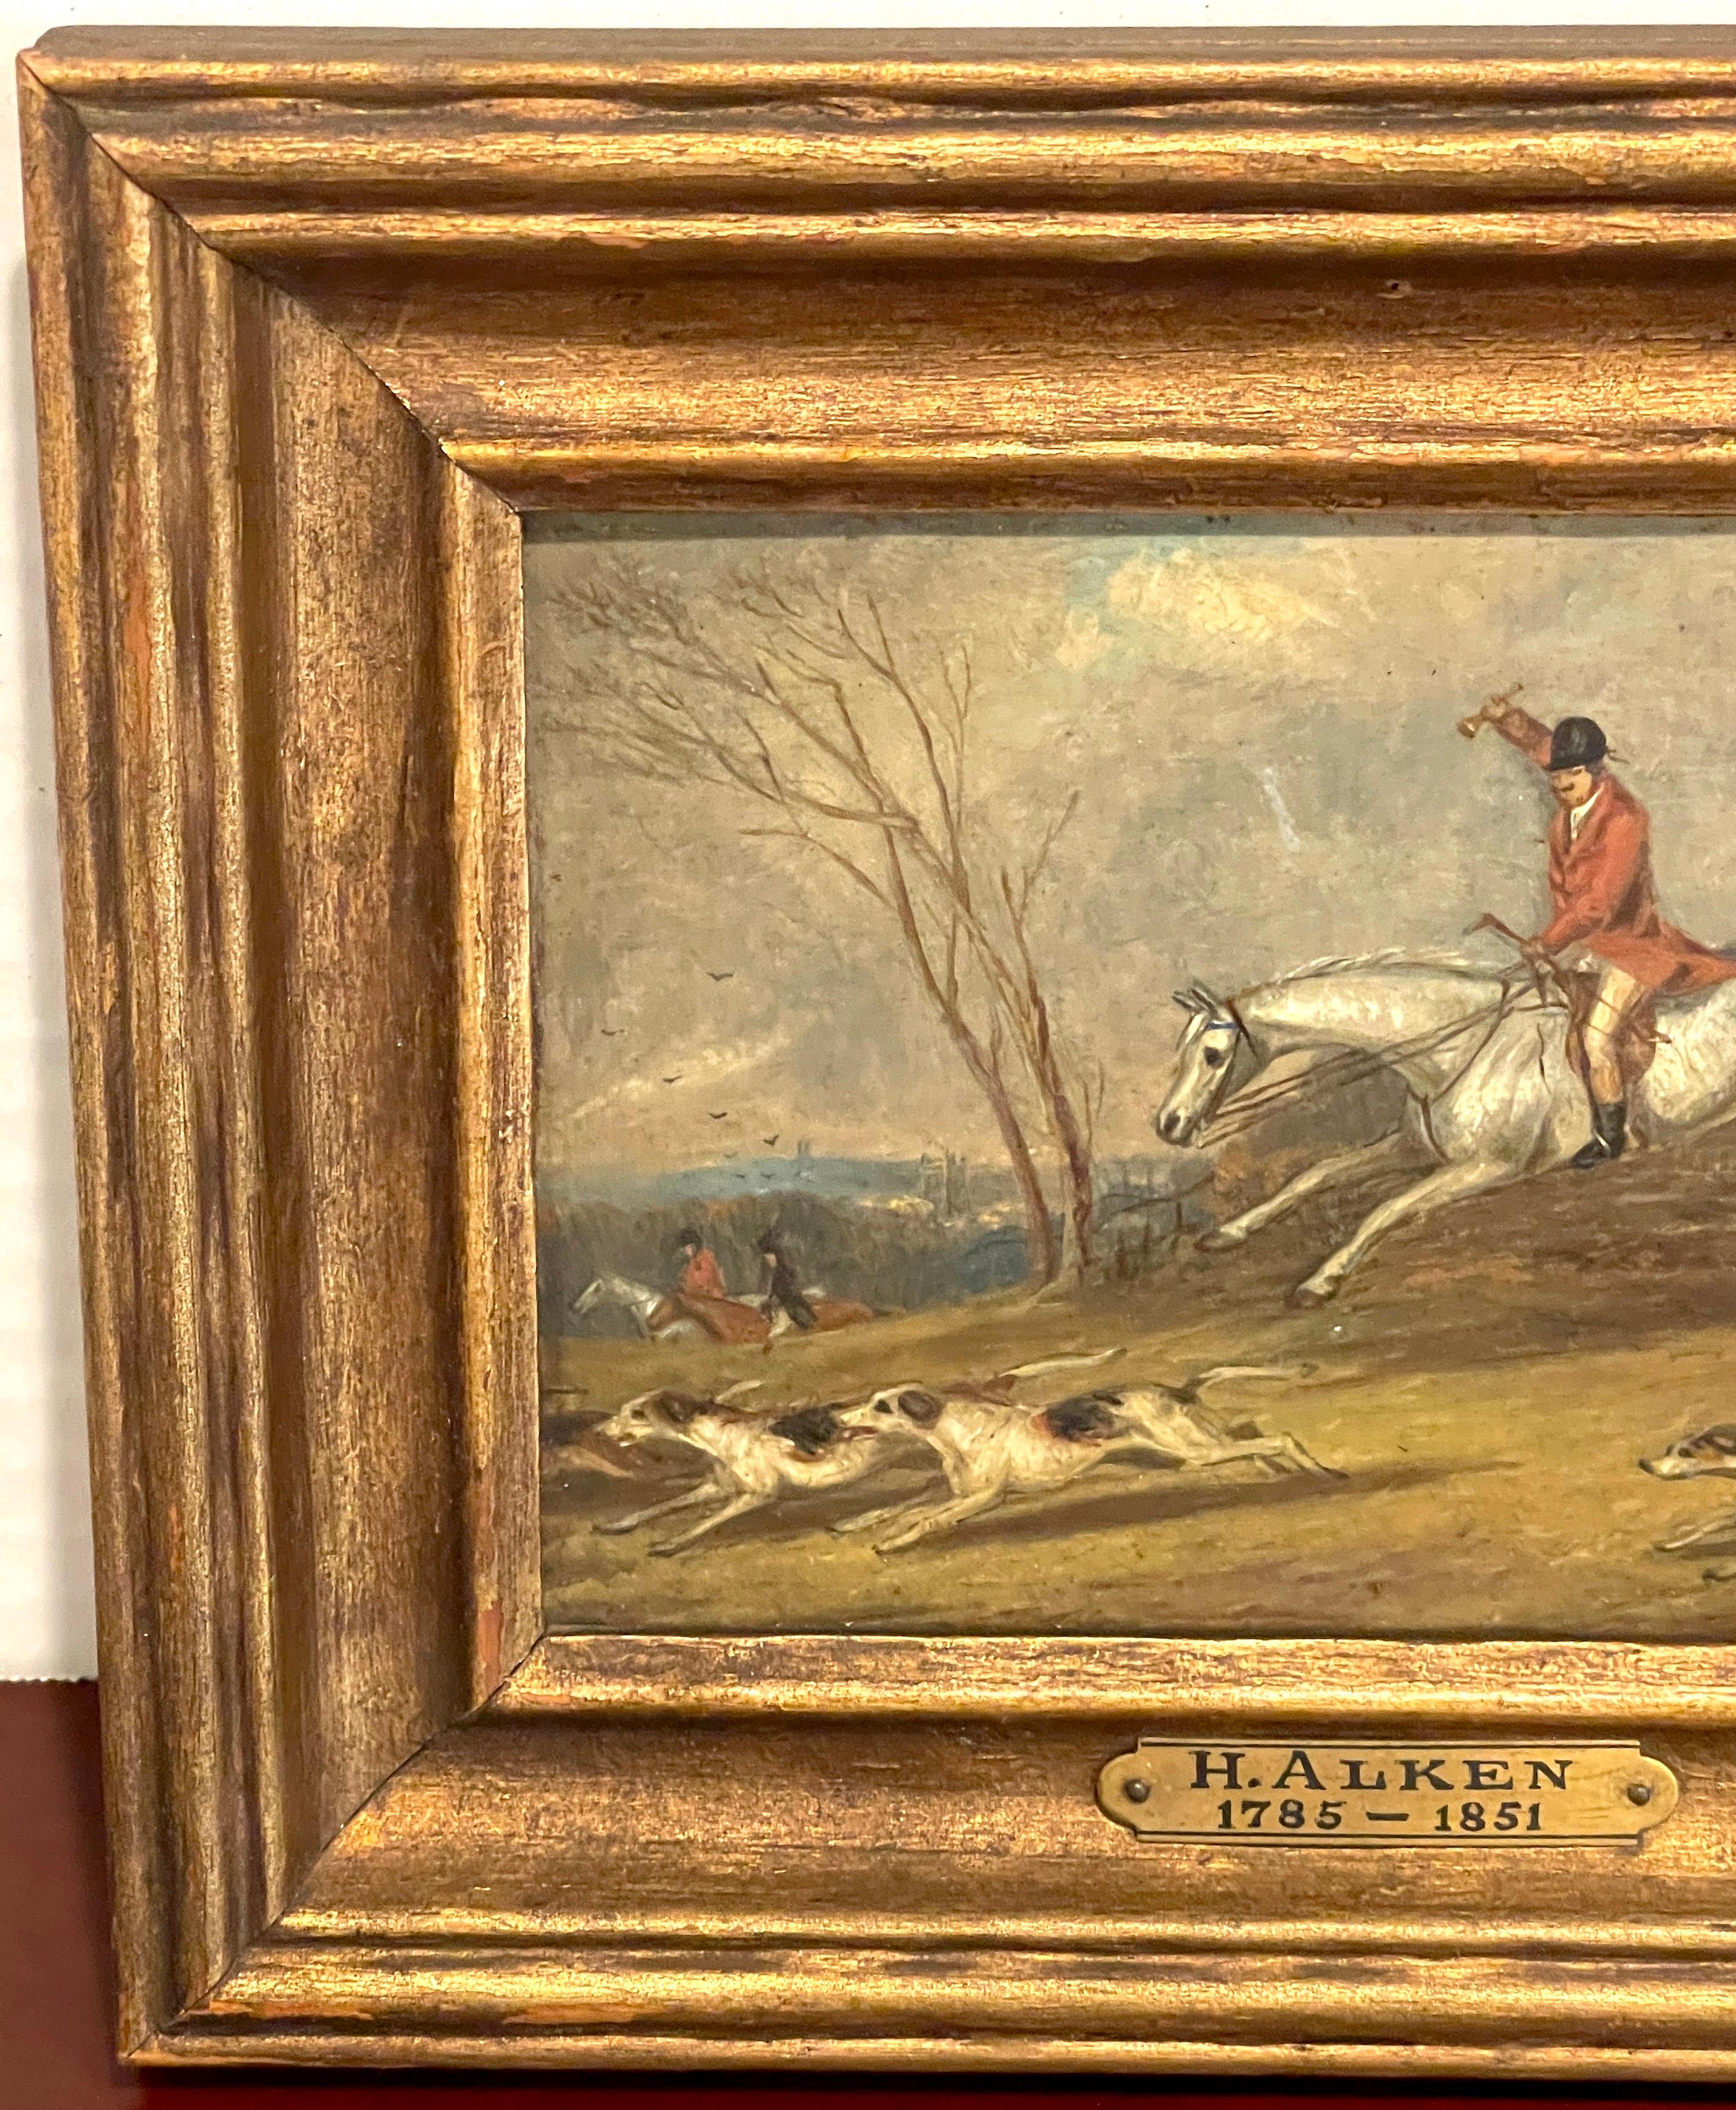 Sporting Art 19th C English Miniature Fox Hunt Painting, Attributed to Henry Alken